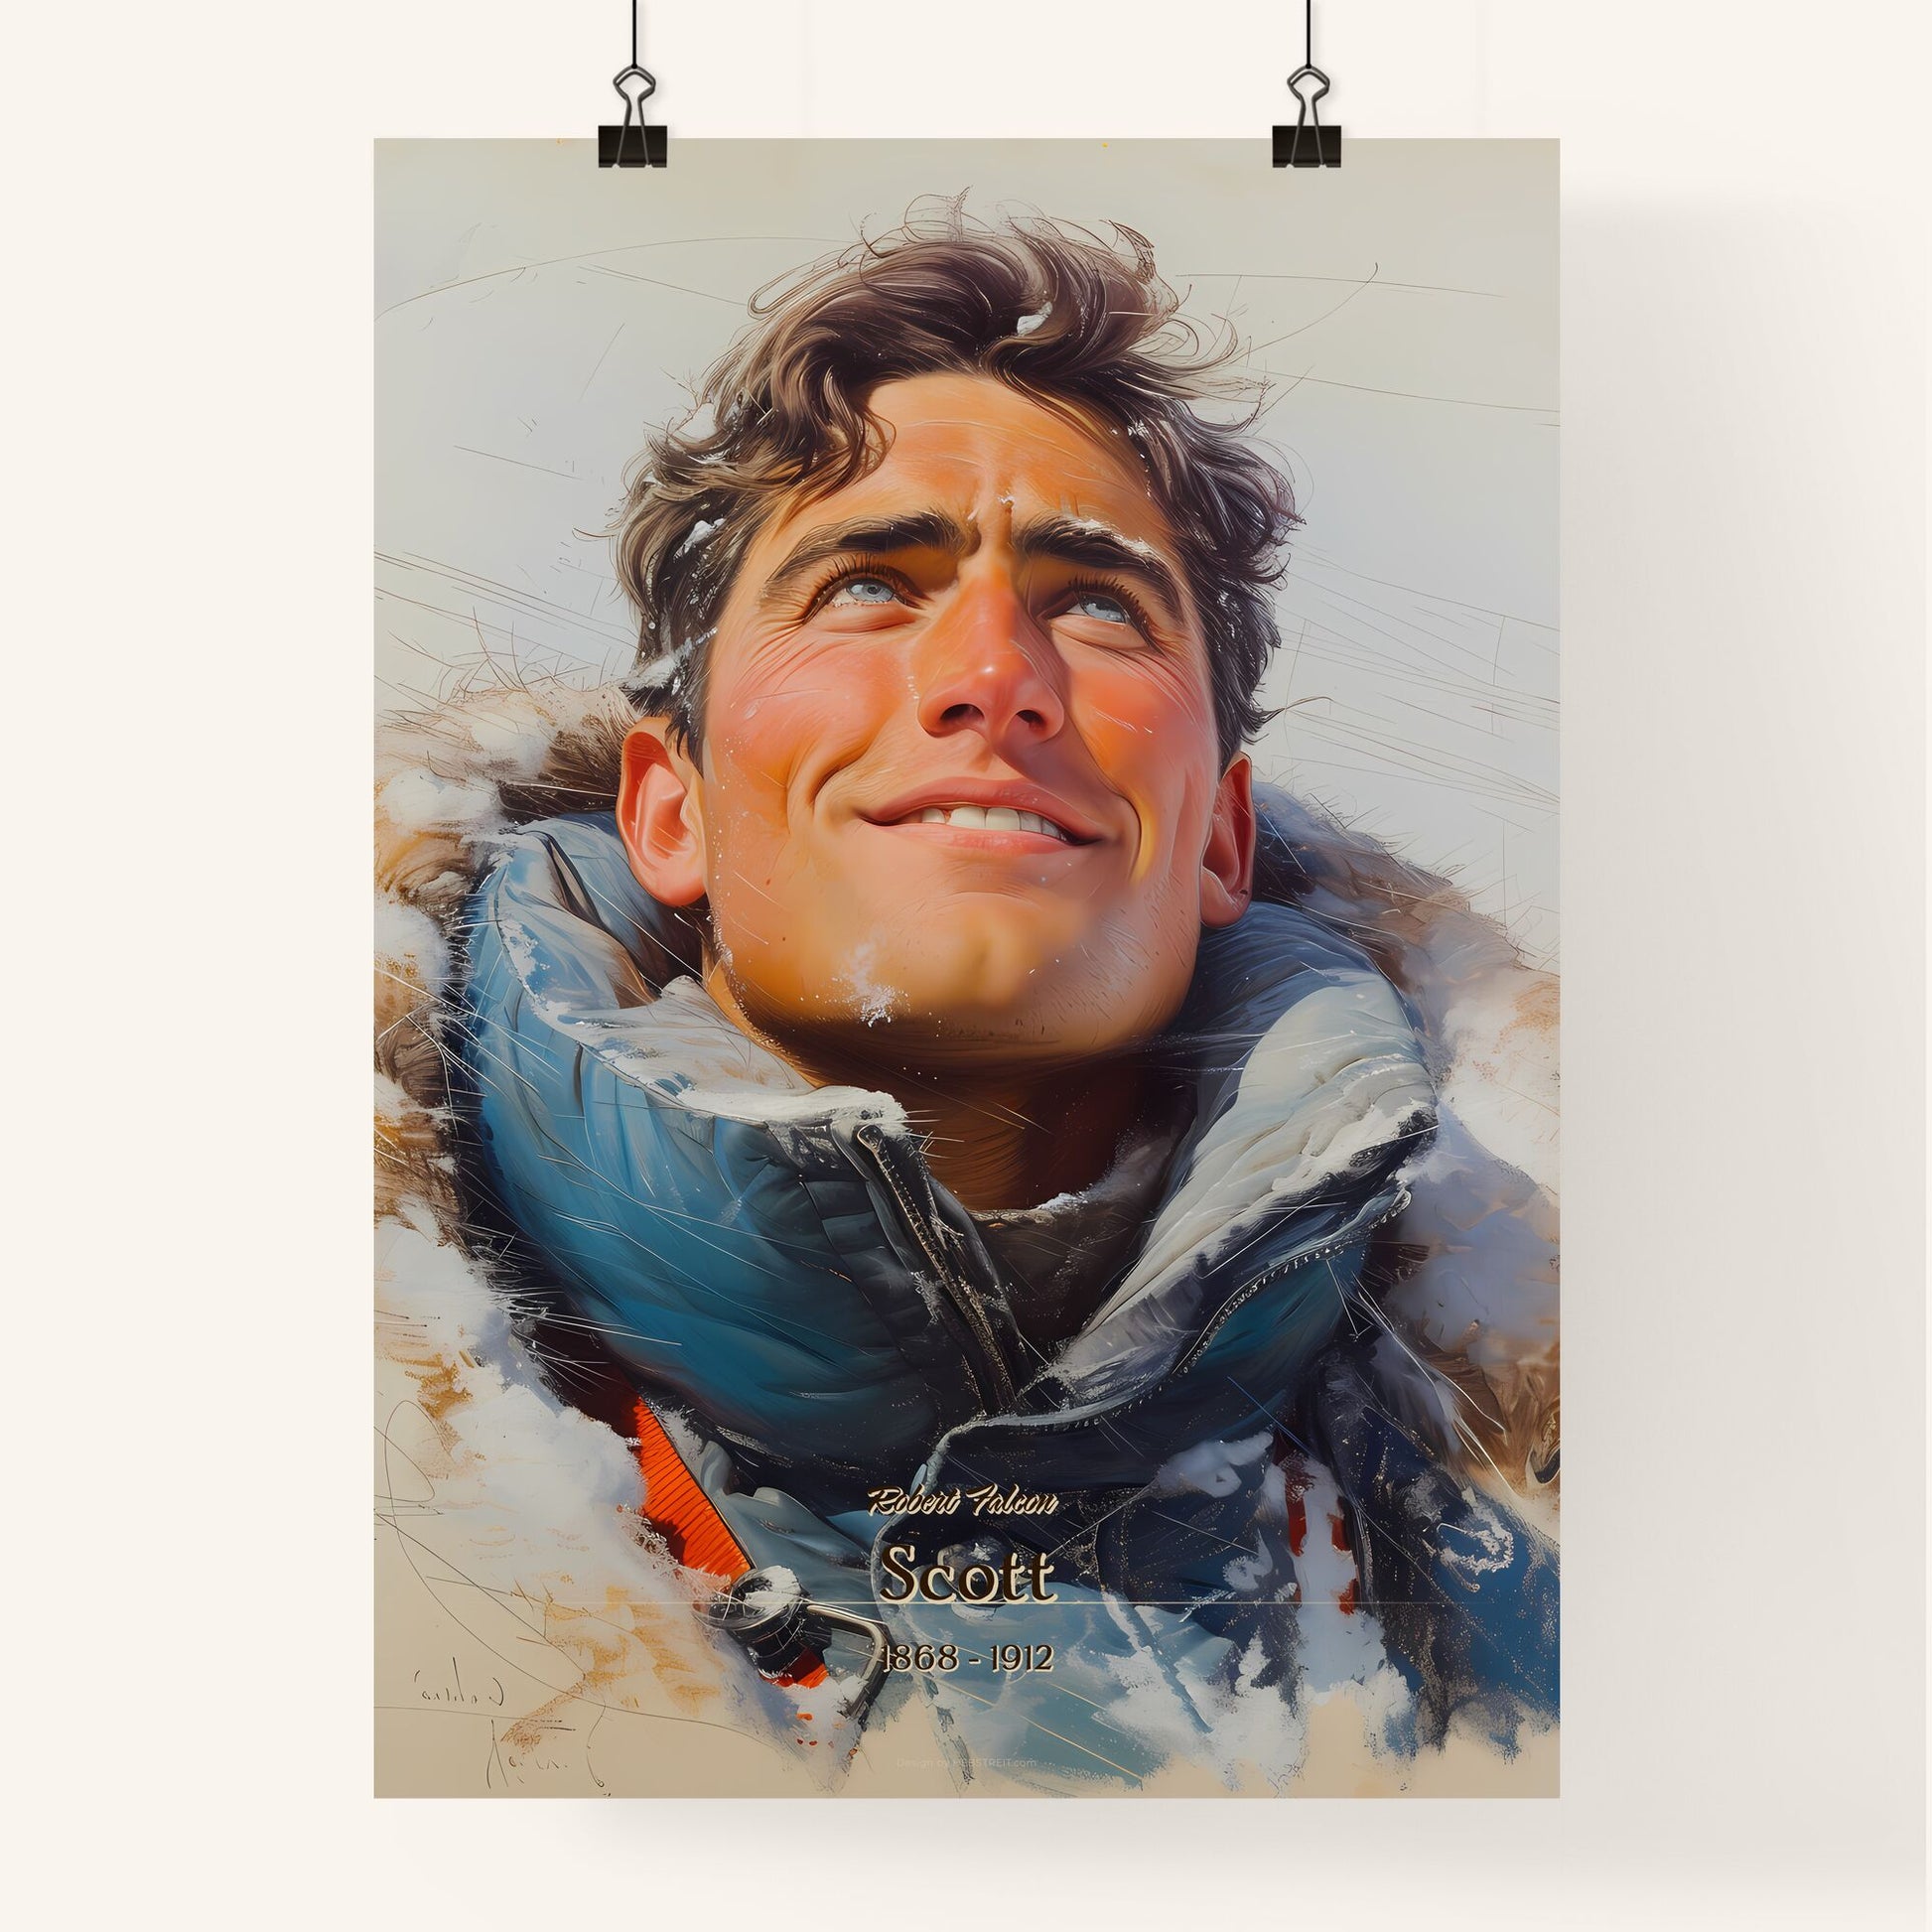 Robert Falcon, Scott, 1868 - 1912, A Poster of a man in a coat looking up Default Title